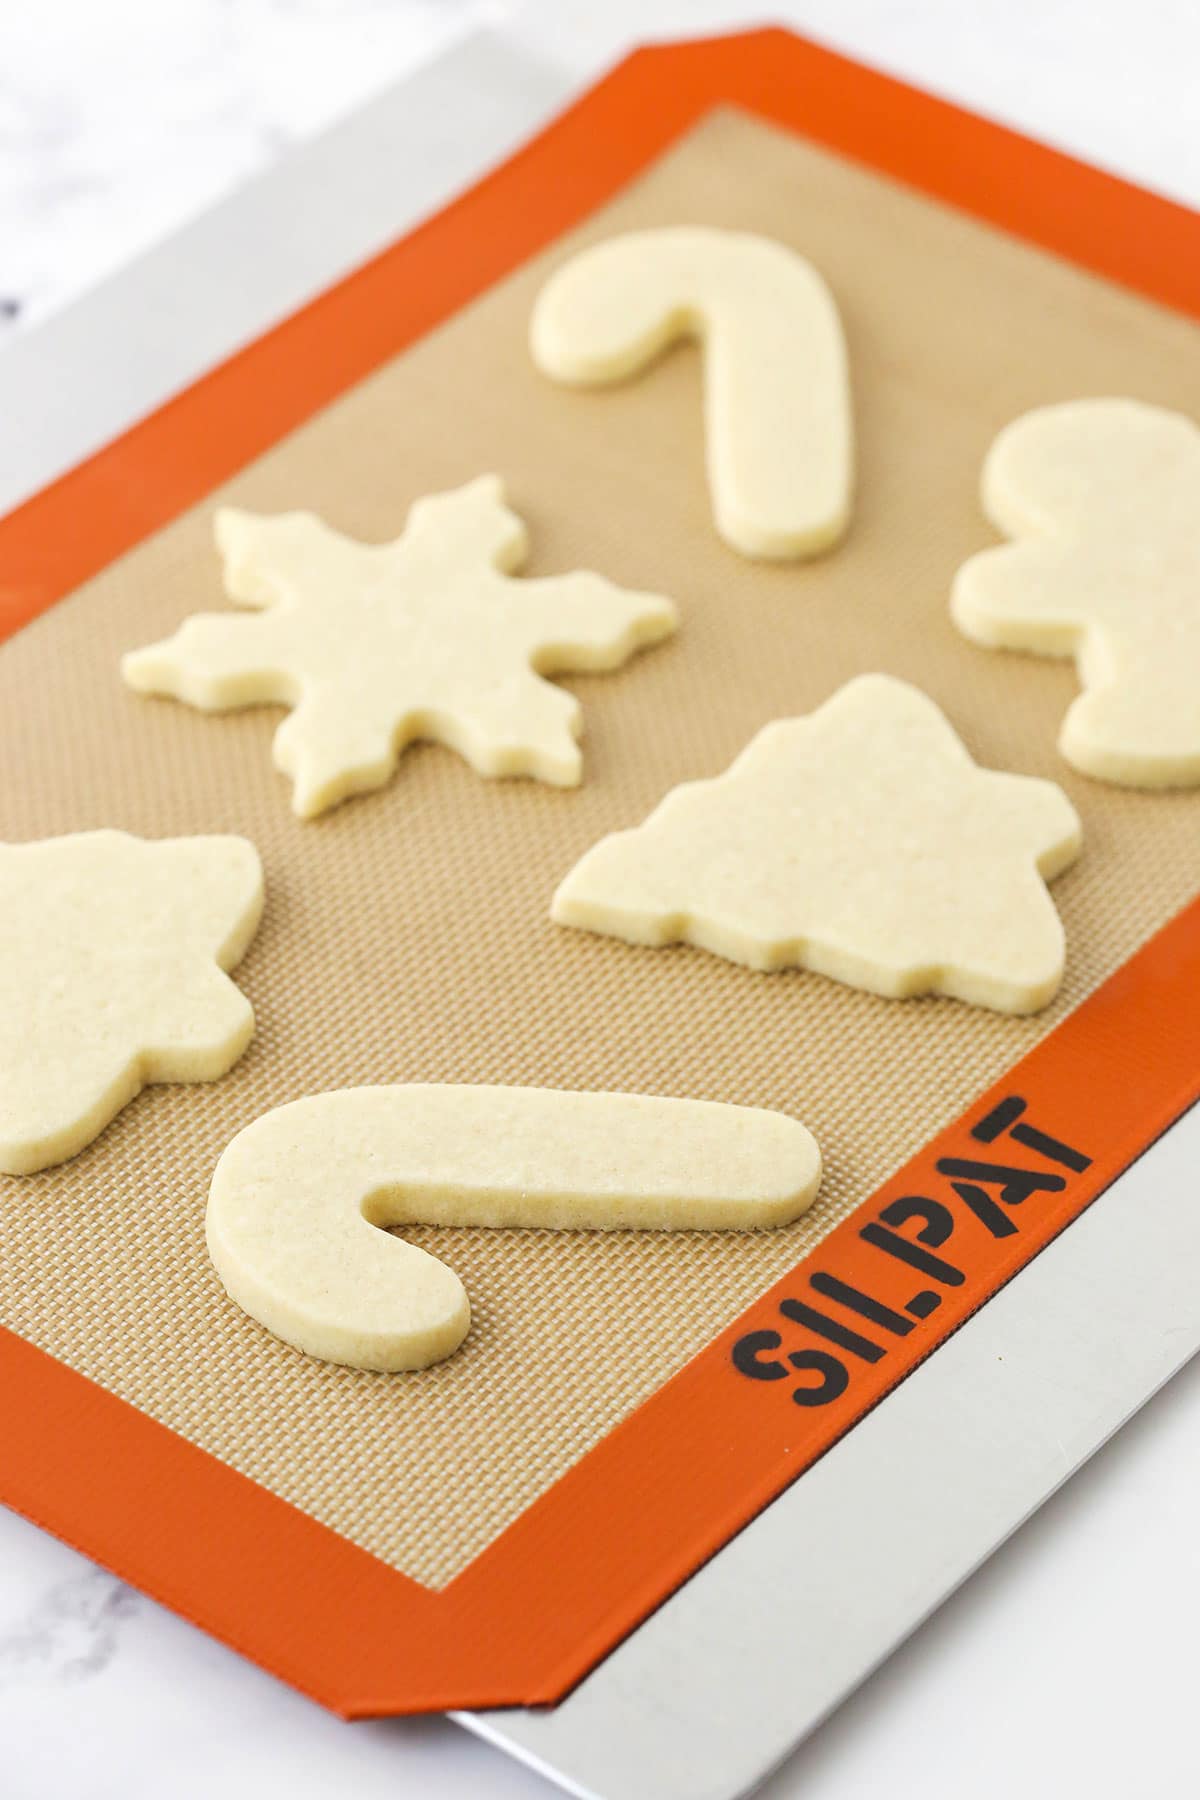 Six baked cut-out sugar cookies on a cookie sheet on top of a marble counter